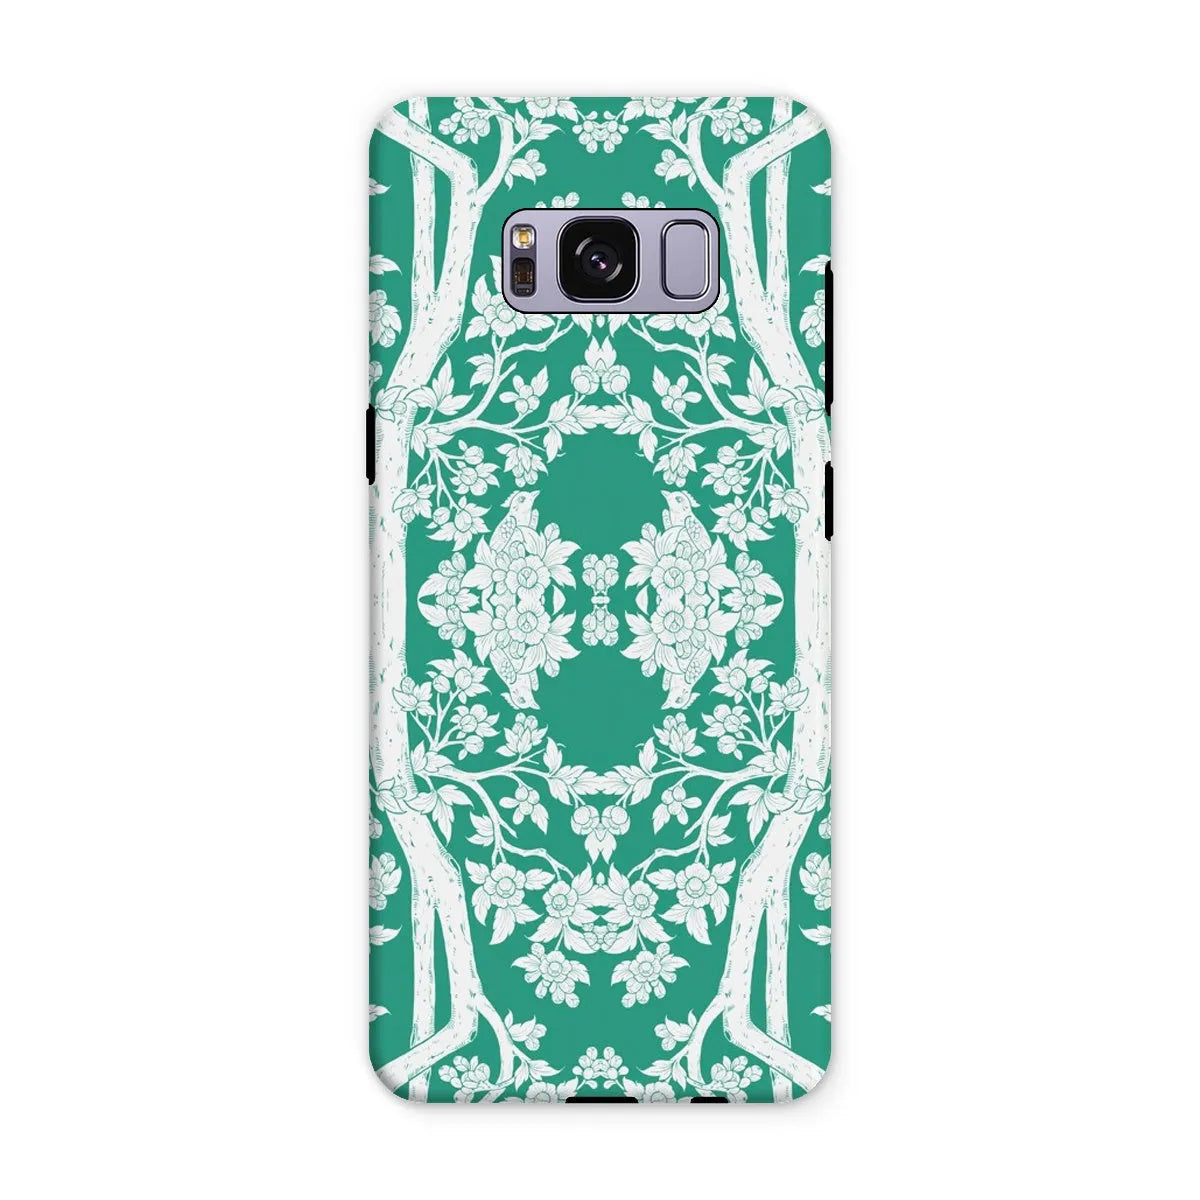 Aviary Green Aesthetic Pattern Art Phone Case - Samsung Galaxy S8 Plus / Matte - Mobile Phone Cases - Aesthetic Art